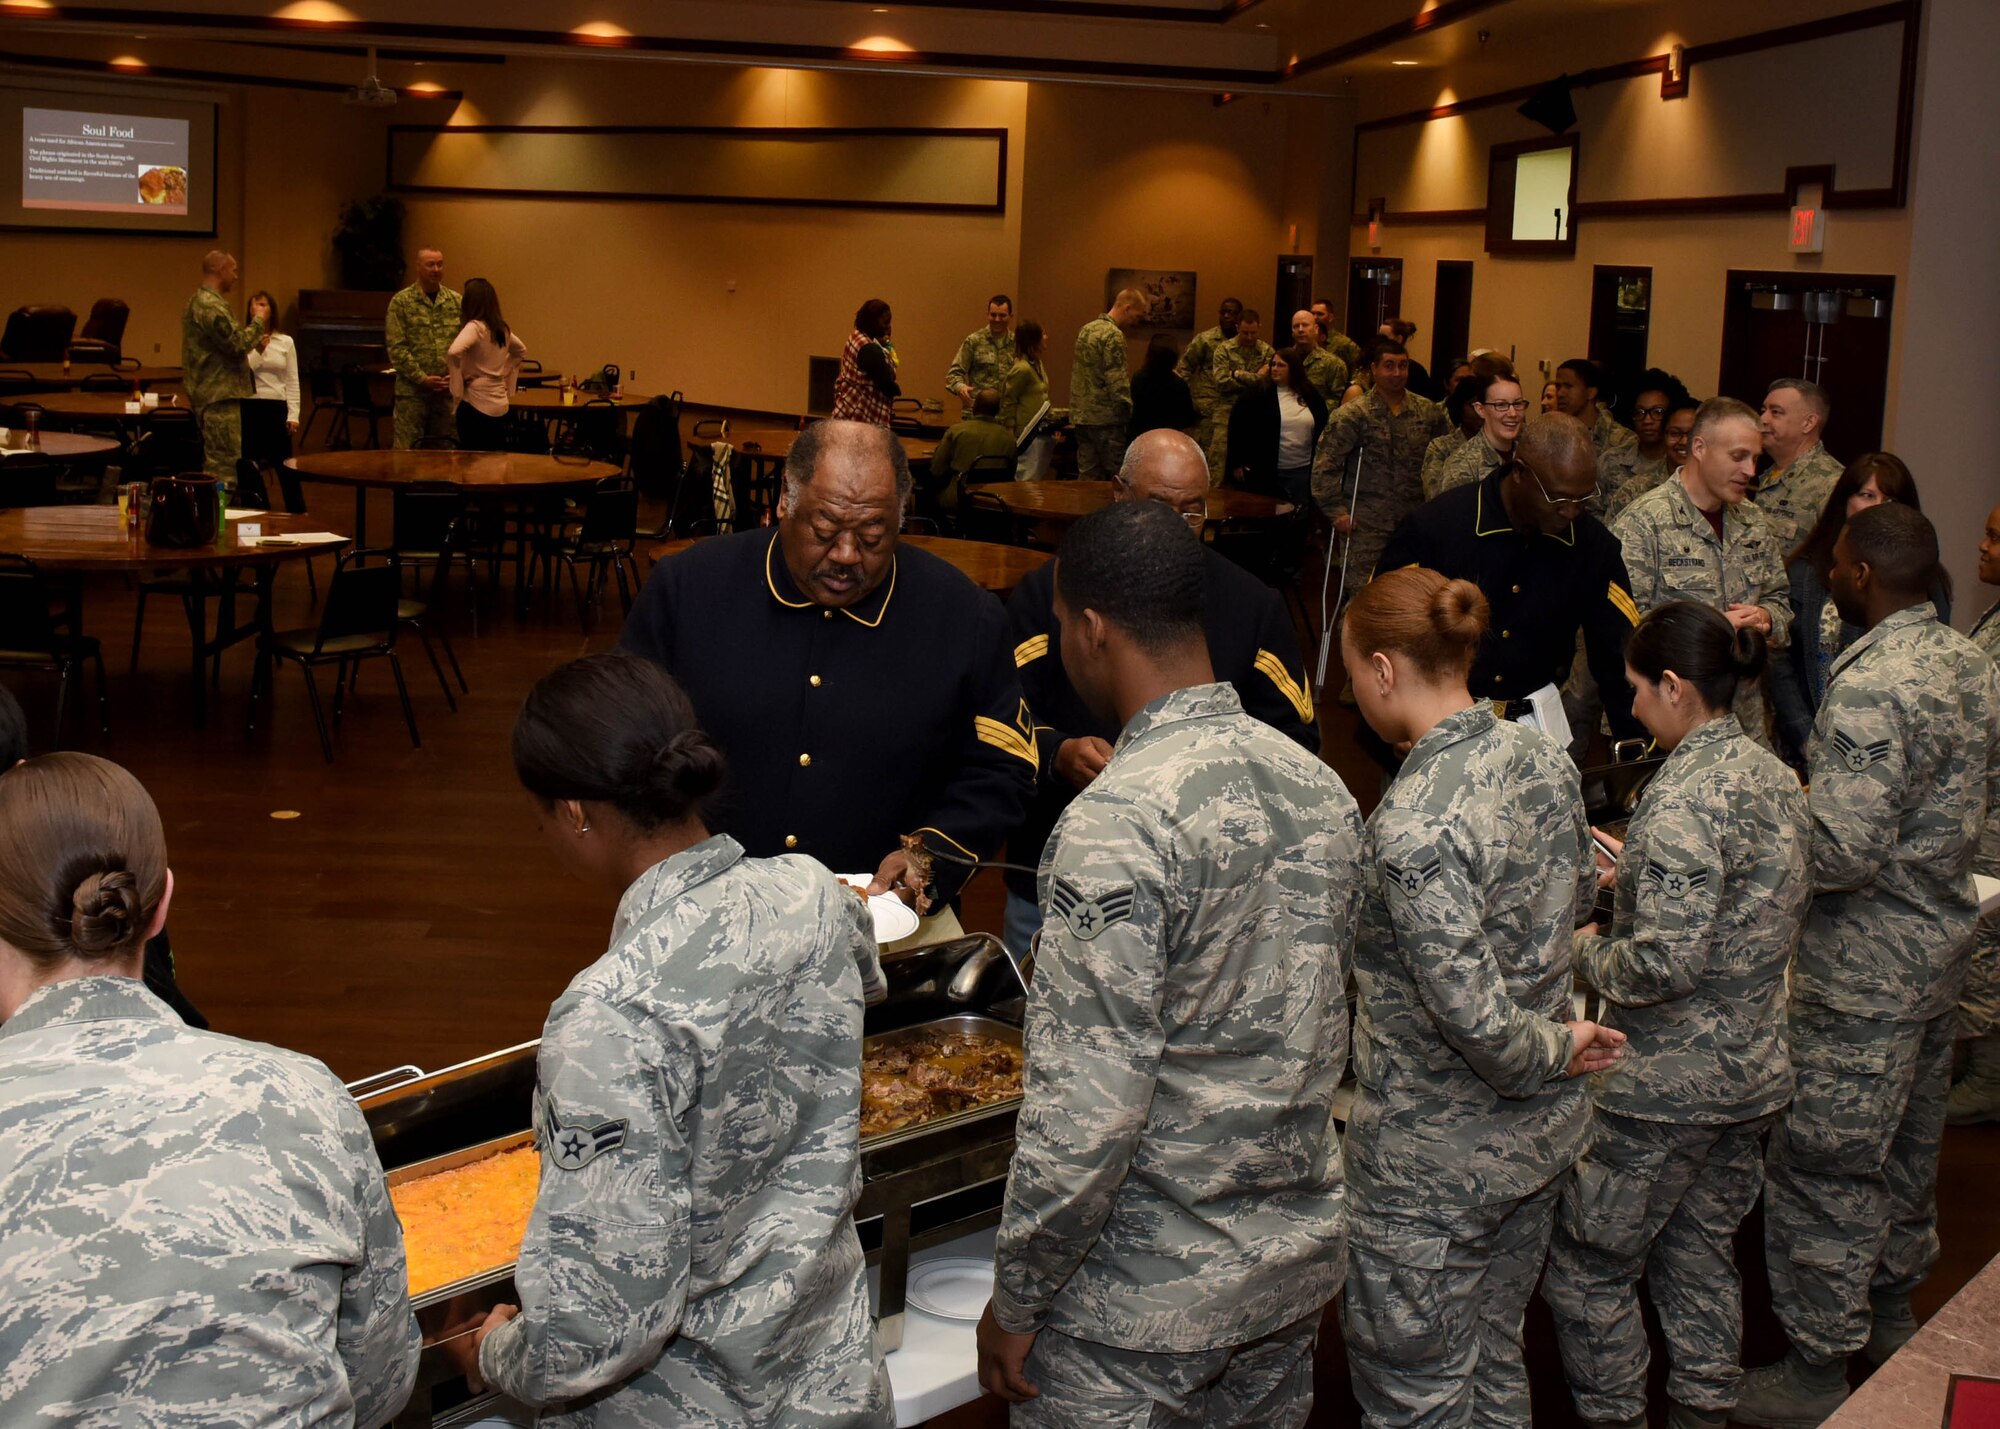 Airmen serve lunch to attendees of the Food for the Soul luncheon and exhibit, Feb. 10, 2017, at Altus Air Force Base, Oklahoma. The luncheon featured traditional soul food and a presentation on the history of the Buffalo Soldiers as part of Altus AFB’s celebration of Black History Month. (U.S. Air Force photo by Senior Airman Nathan Clark/Released)